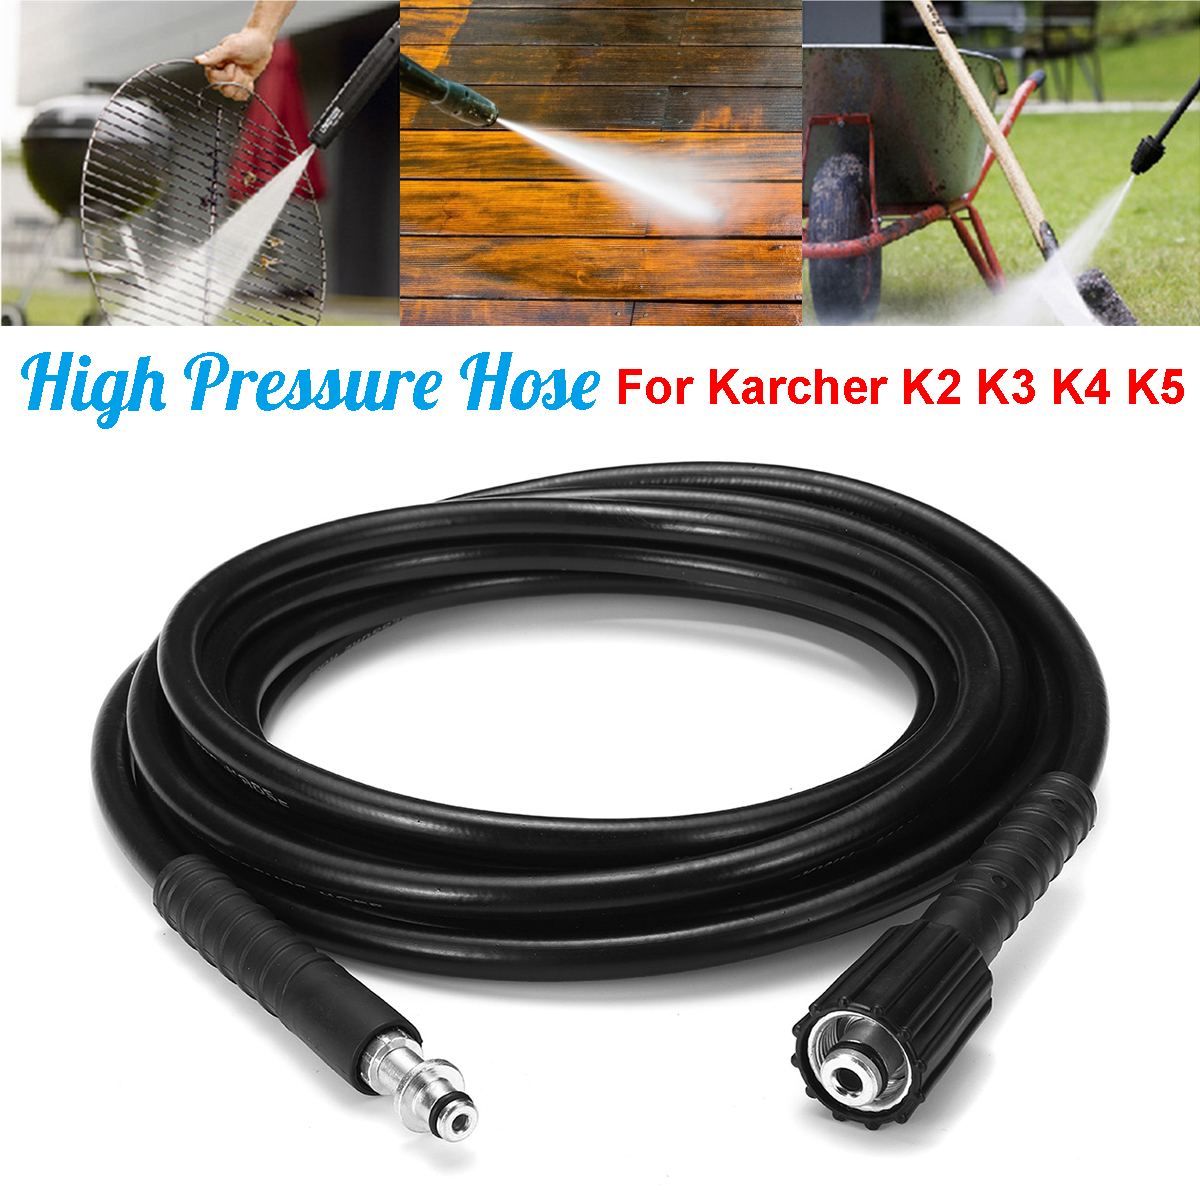 3-24M-High-Pressure-Washer-Drain-Cleaning-Hose-Pipe-Cleaner-For-Karcher-K2-K3-K5-1455881-1